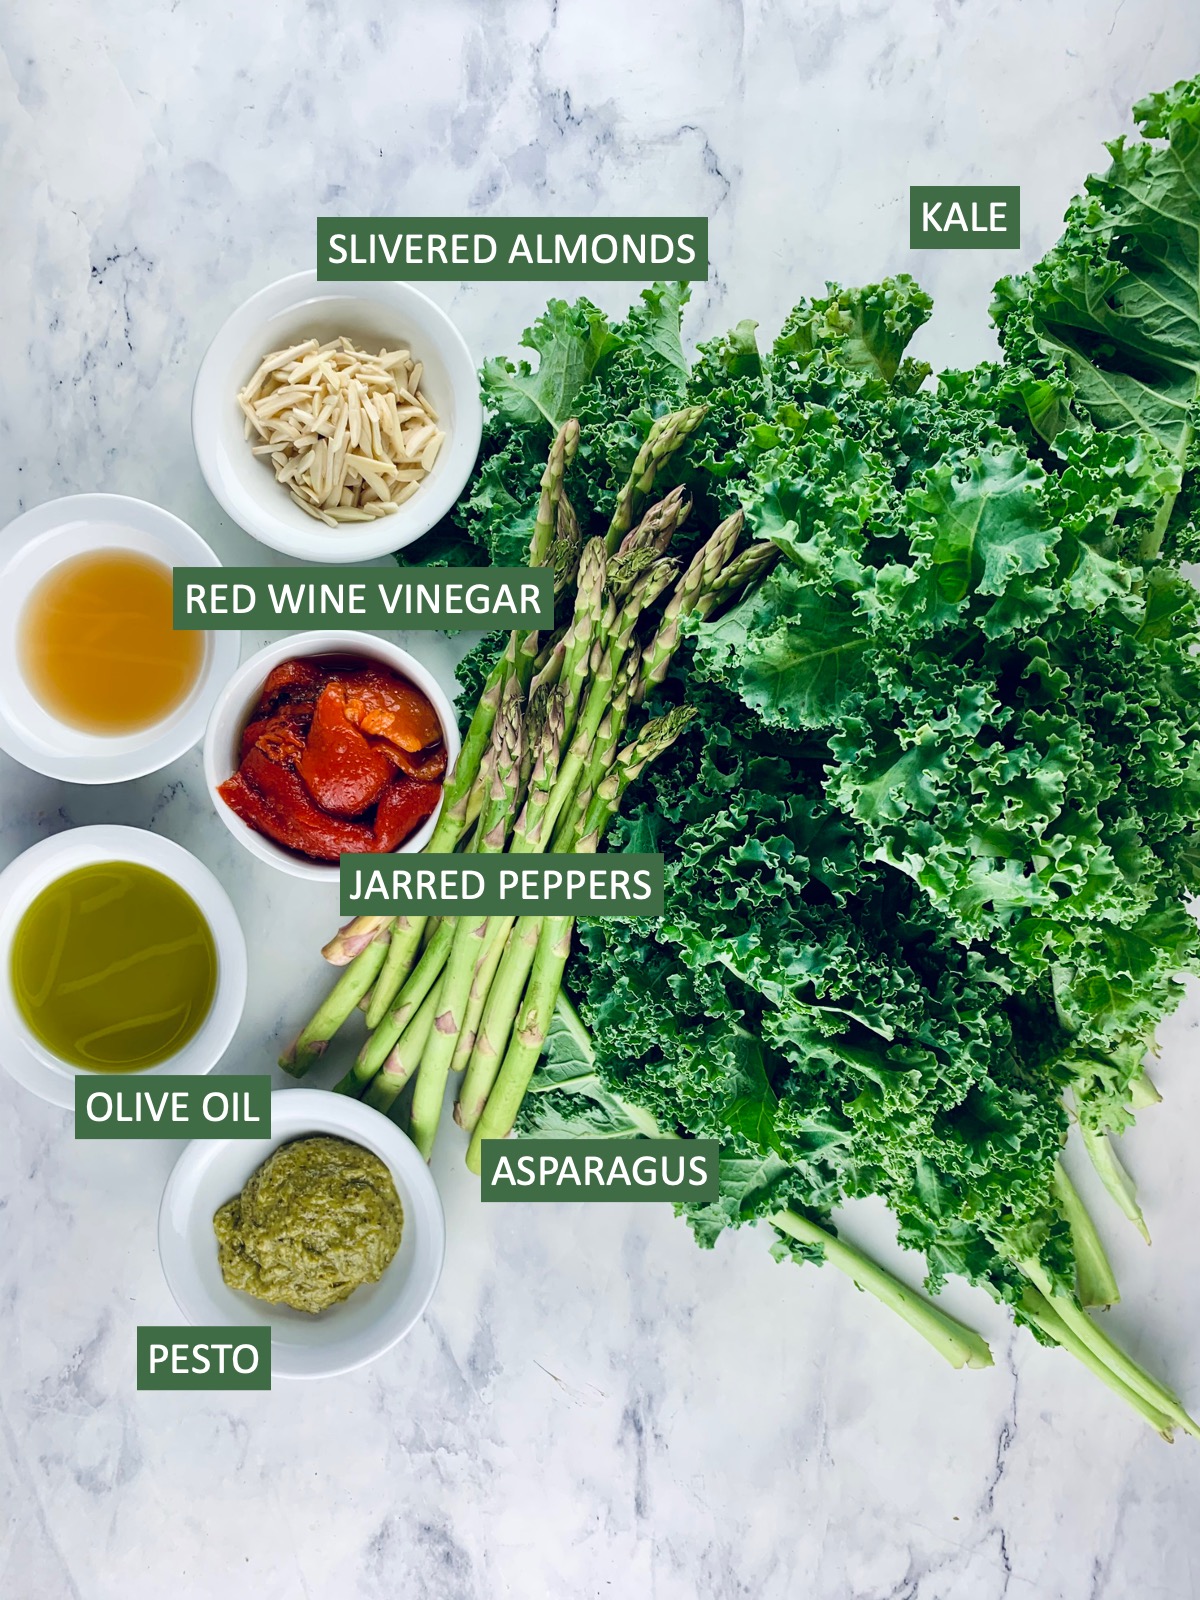 Labelled ingredients needed to make a Grilled Asparagus Kale Salad.